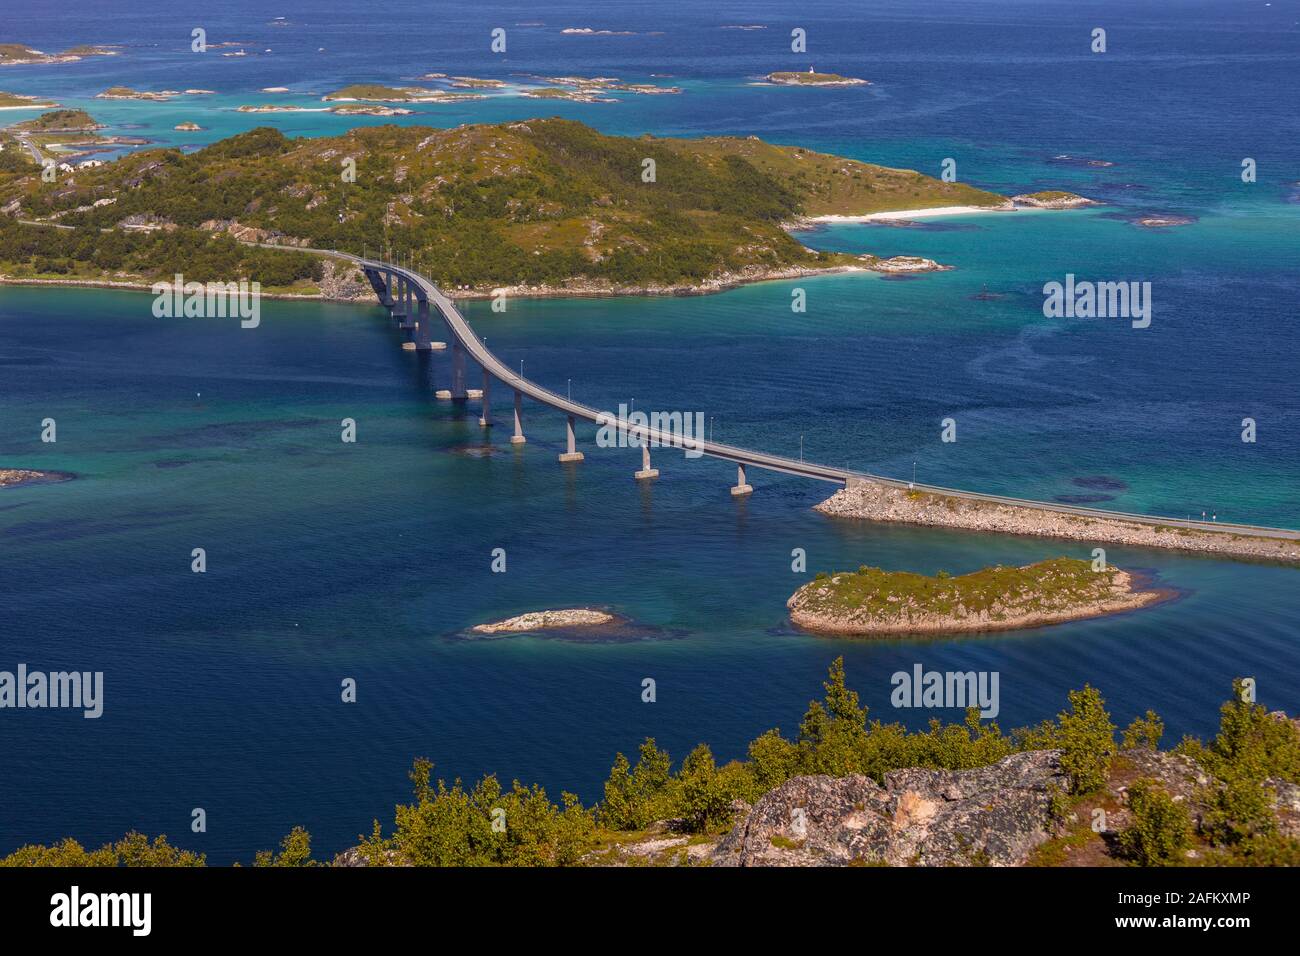 SOMMARØYA, TROMS COUNTY, NORWAY - Bridge connects group of islands in northern Norway. Stock Photo